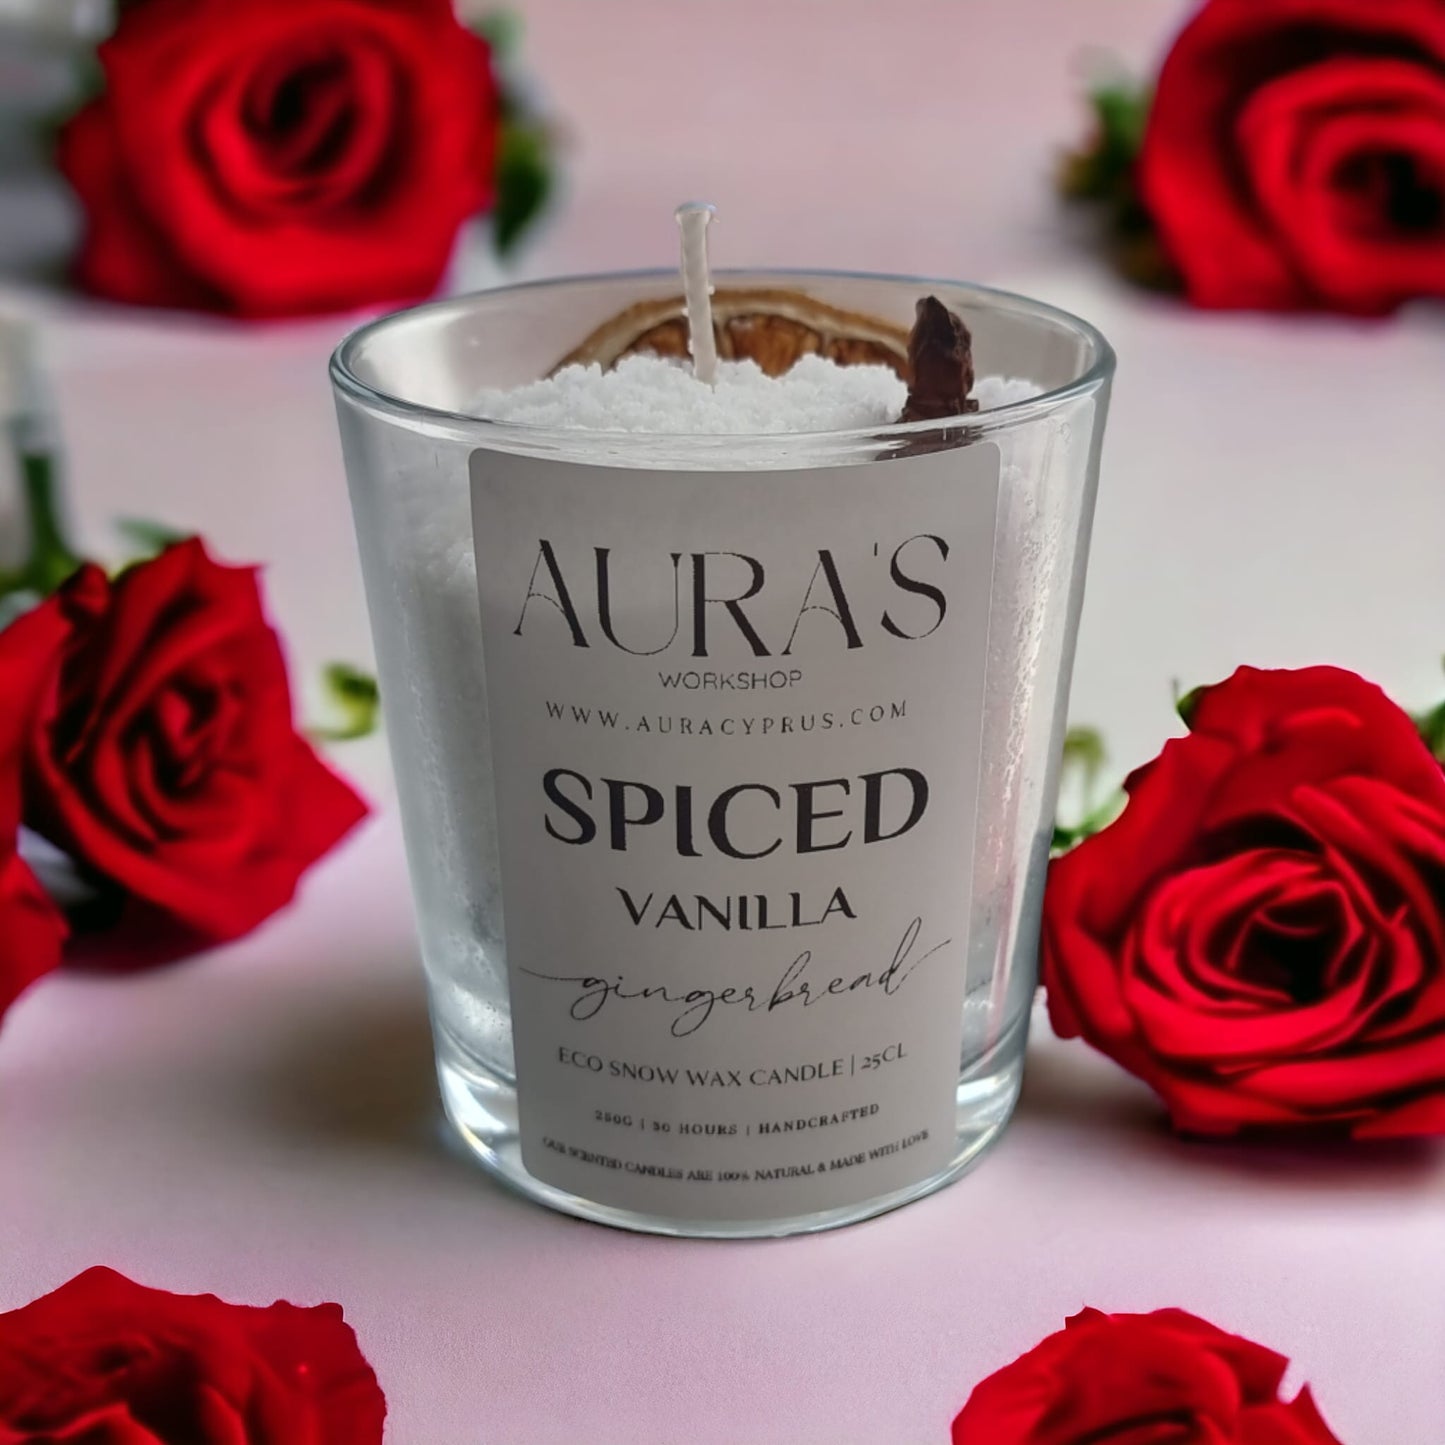 Spiced Vanilla Gingerbread Scent - Eco Snow Candle - Auras Workshop  -  Candles -   - Cyprus & Greece - Wholesale - Retail #